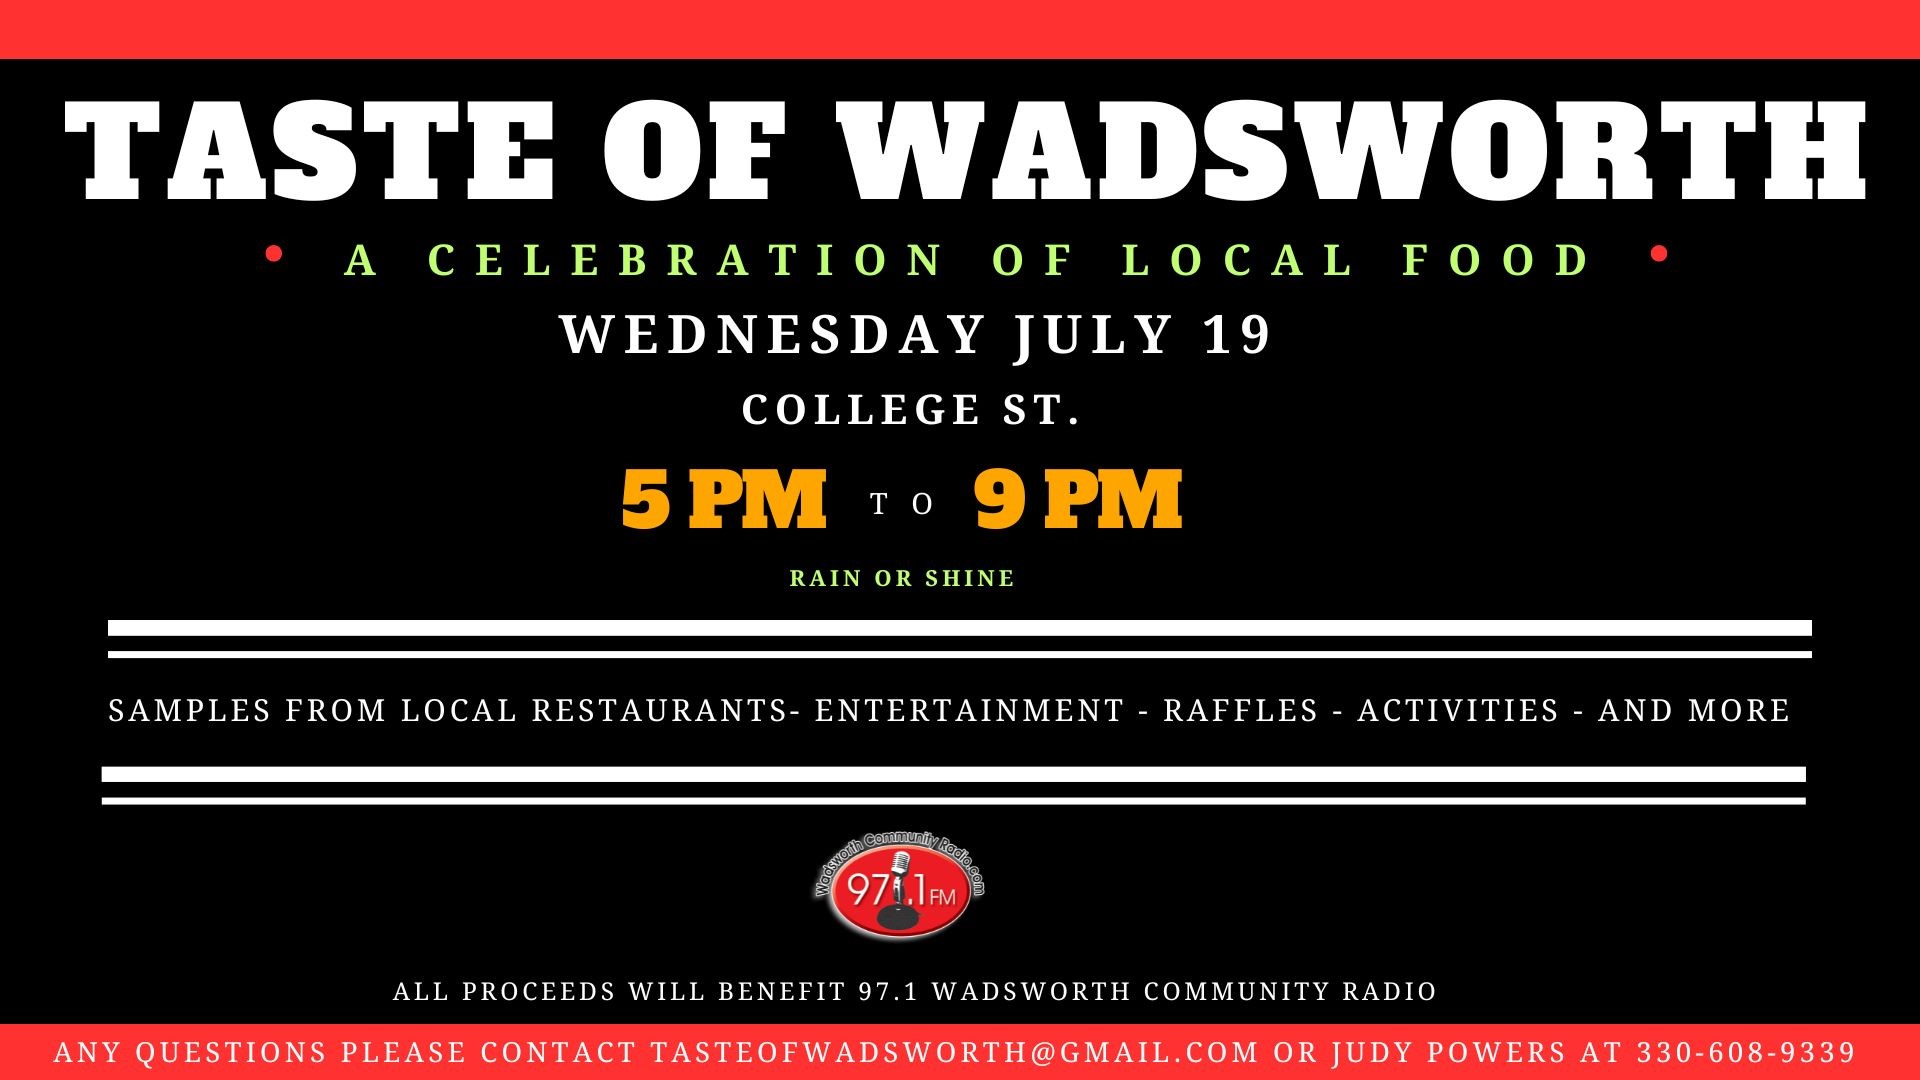 When is Taste of Wadsworth in Medina County?